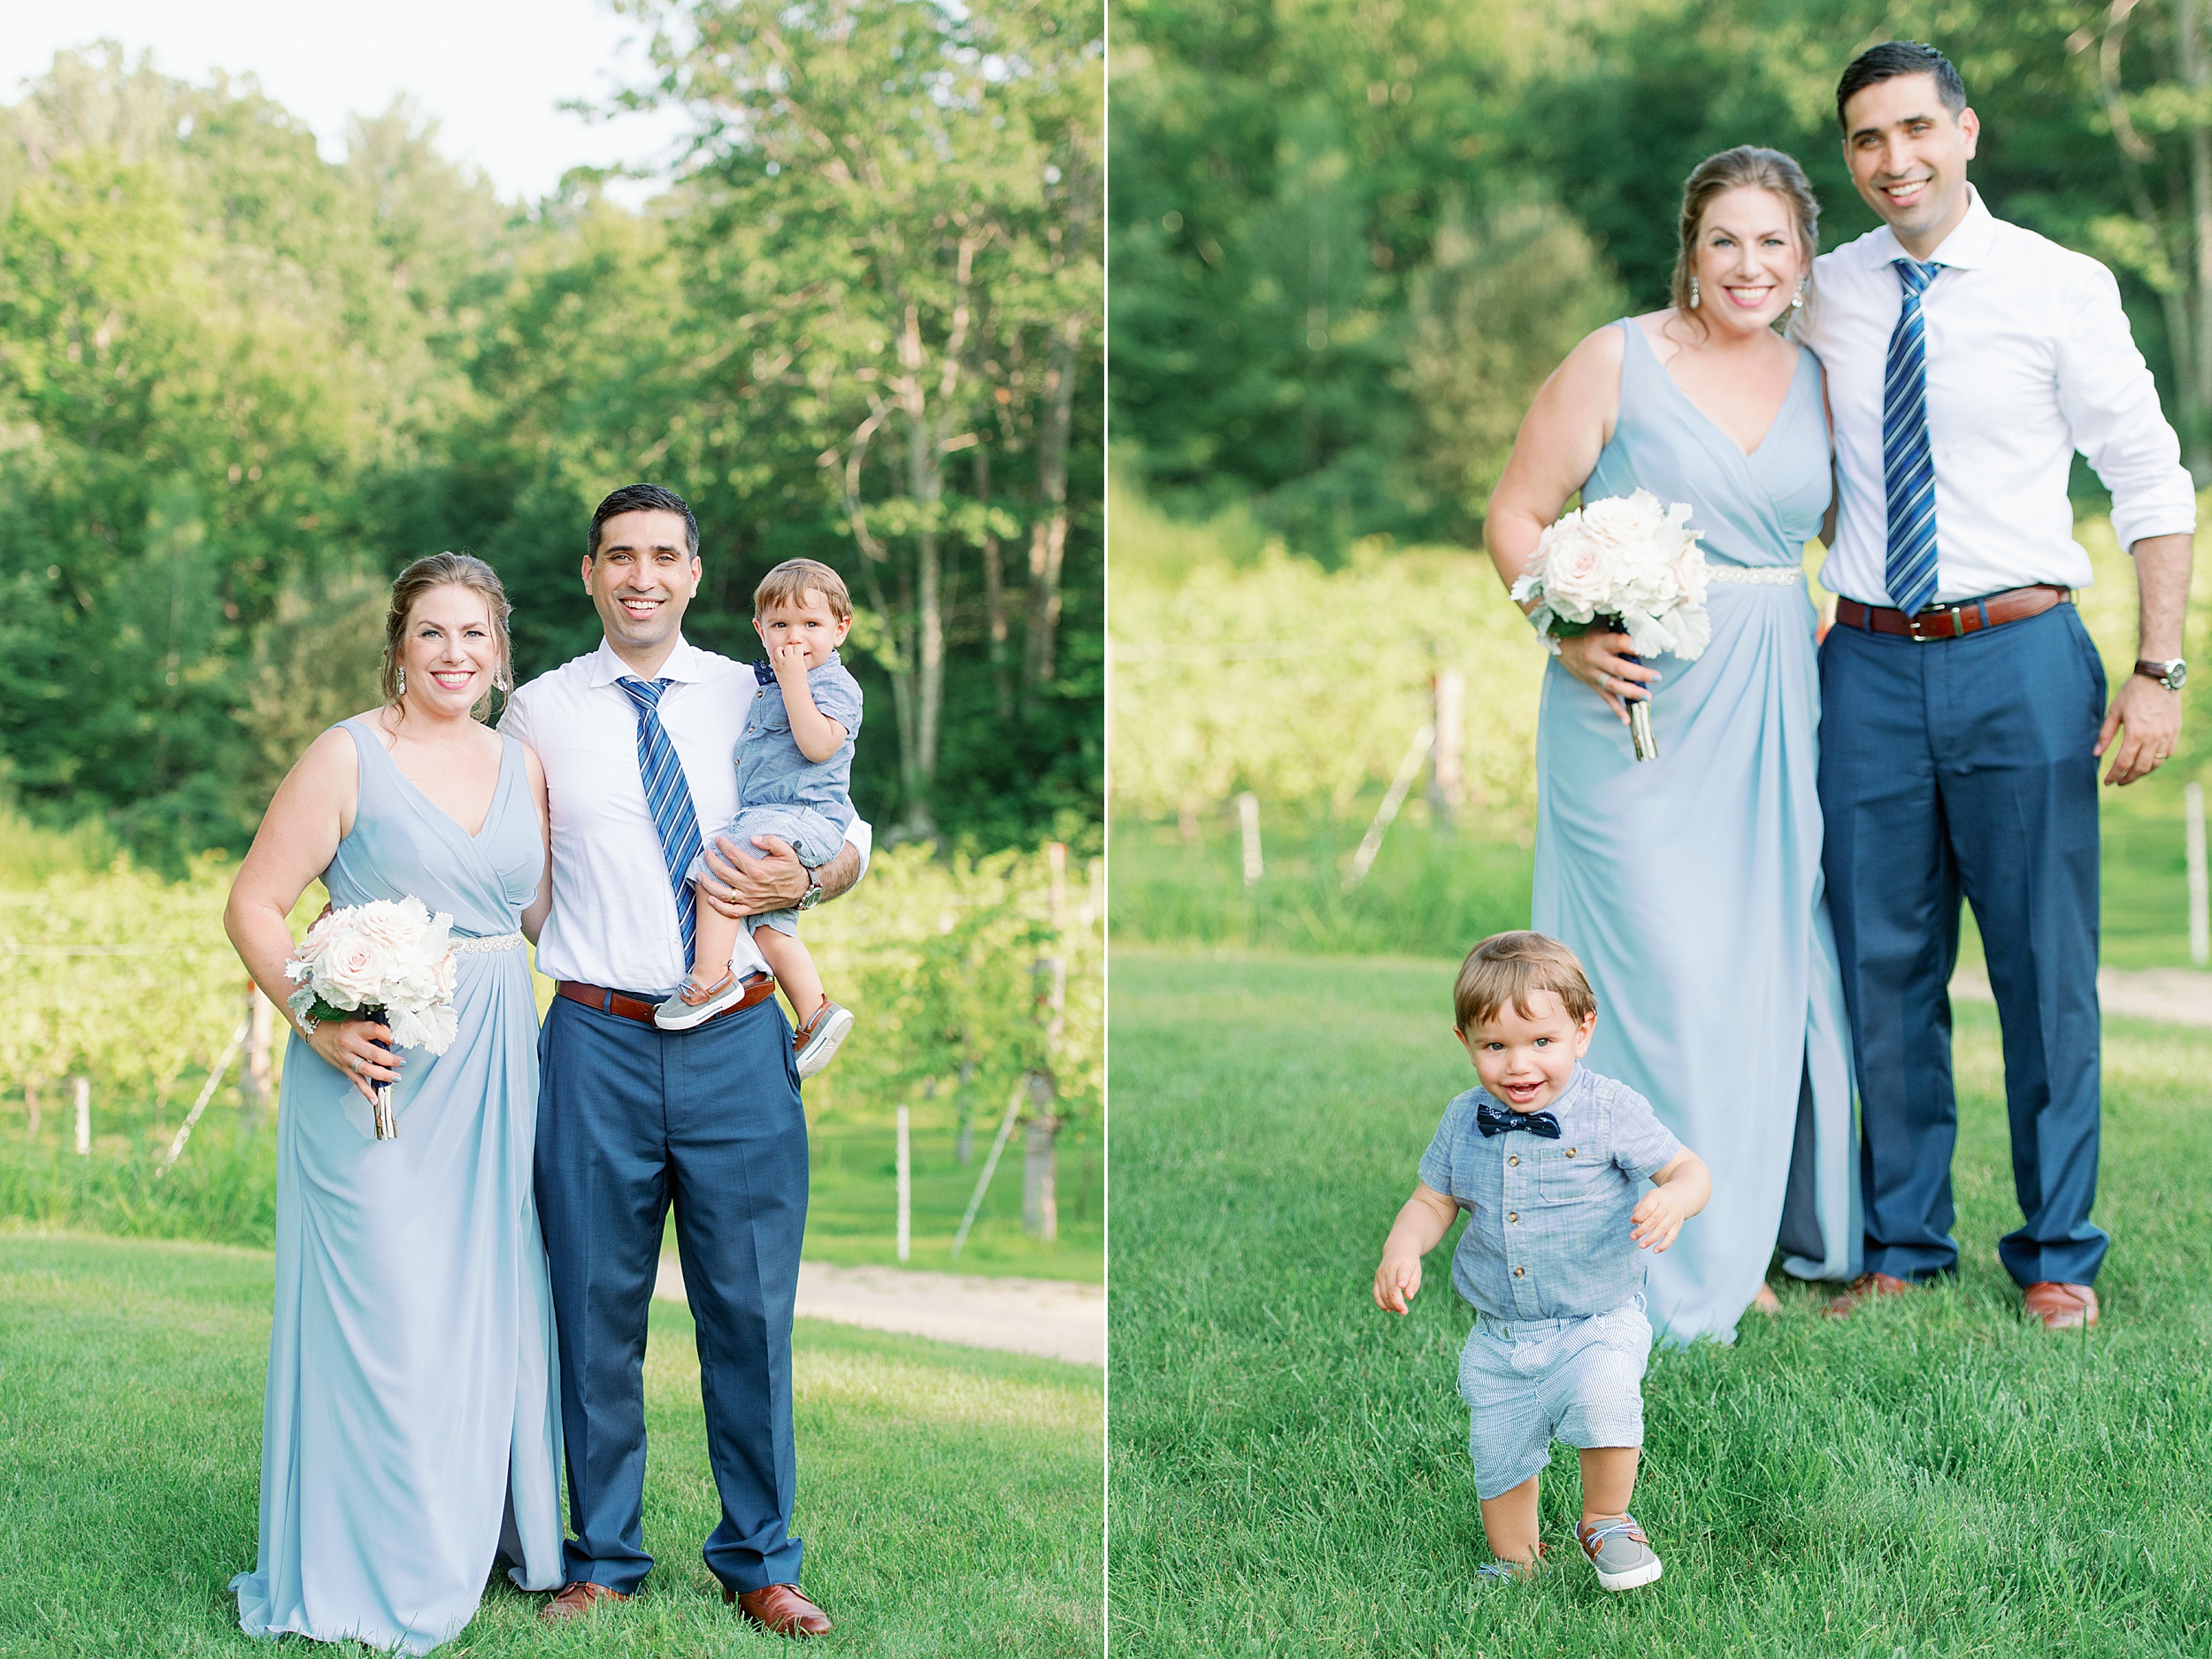 family portraits at vineyard wedding in pale blue dress and navy suit